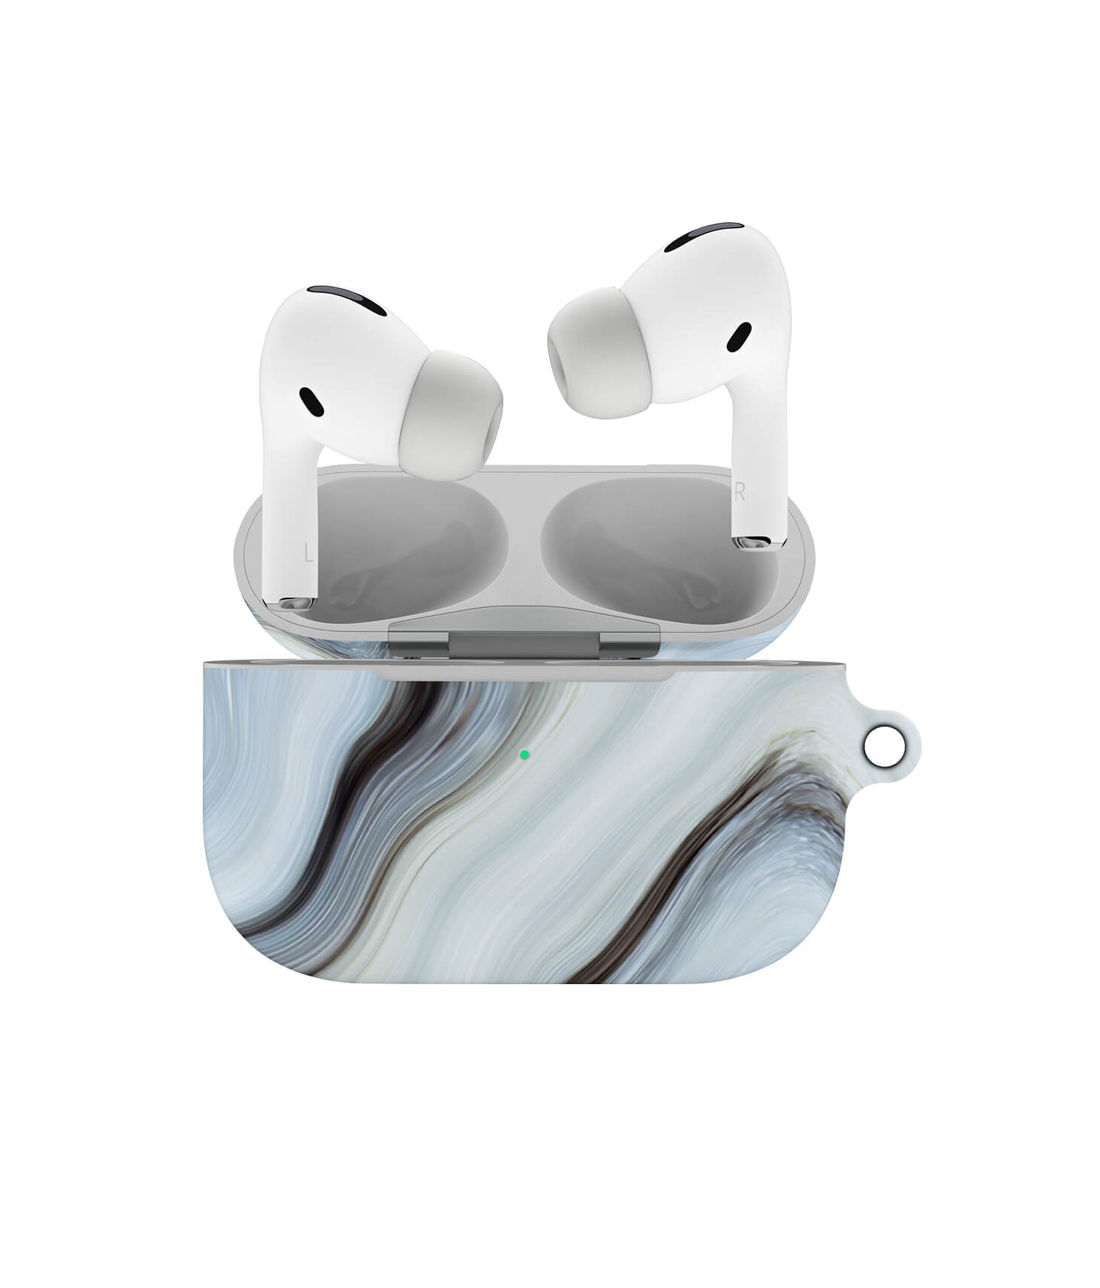 Buy Liquid Funk White - Hard Shell Airpod Pro Case Airpod Cases Online